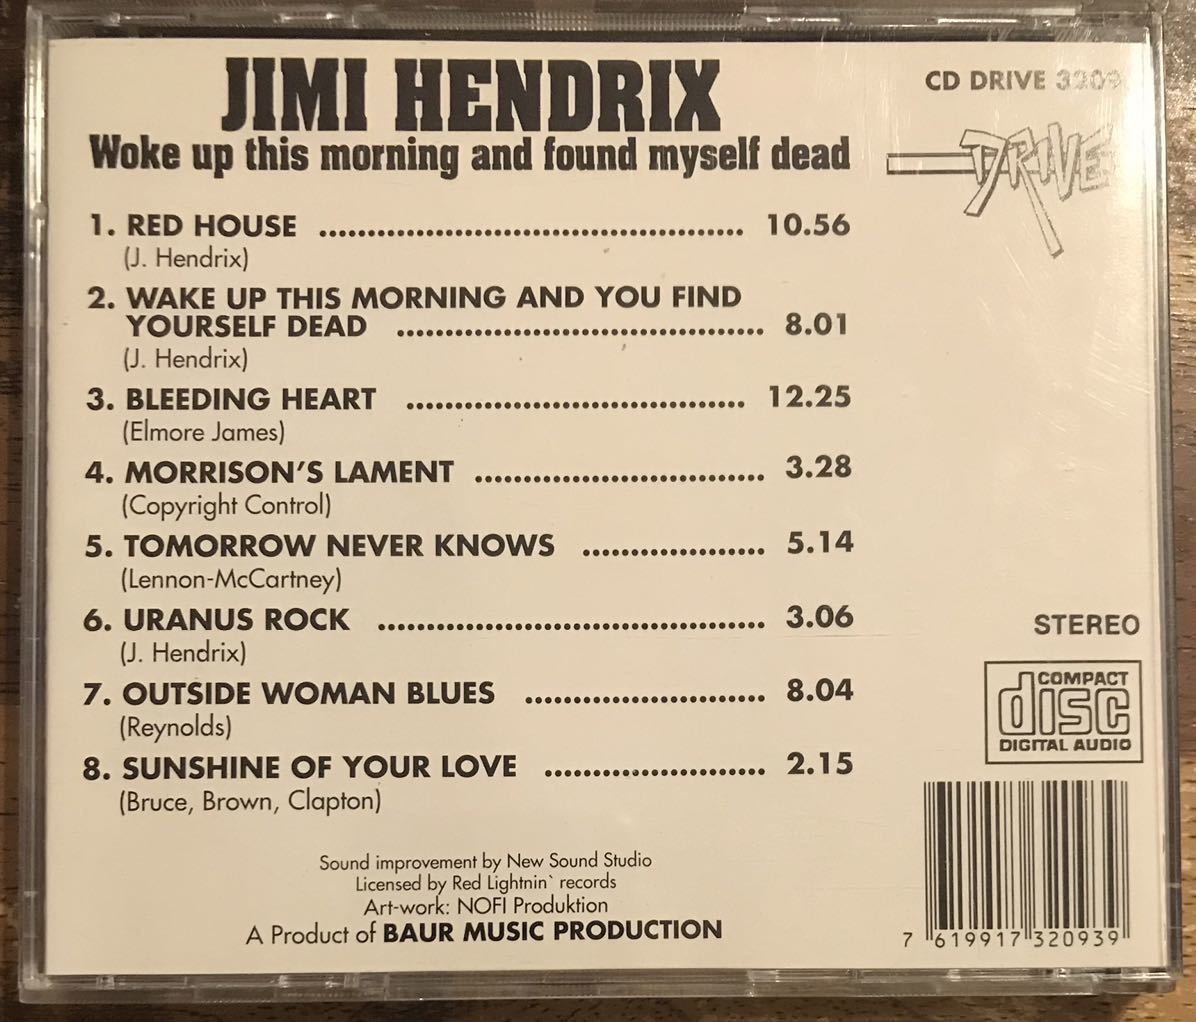 Jimi Hendrix / Wake Up This Morning And Found Myself Dead / 1CD / ジミヘンドリックス_画像2